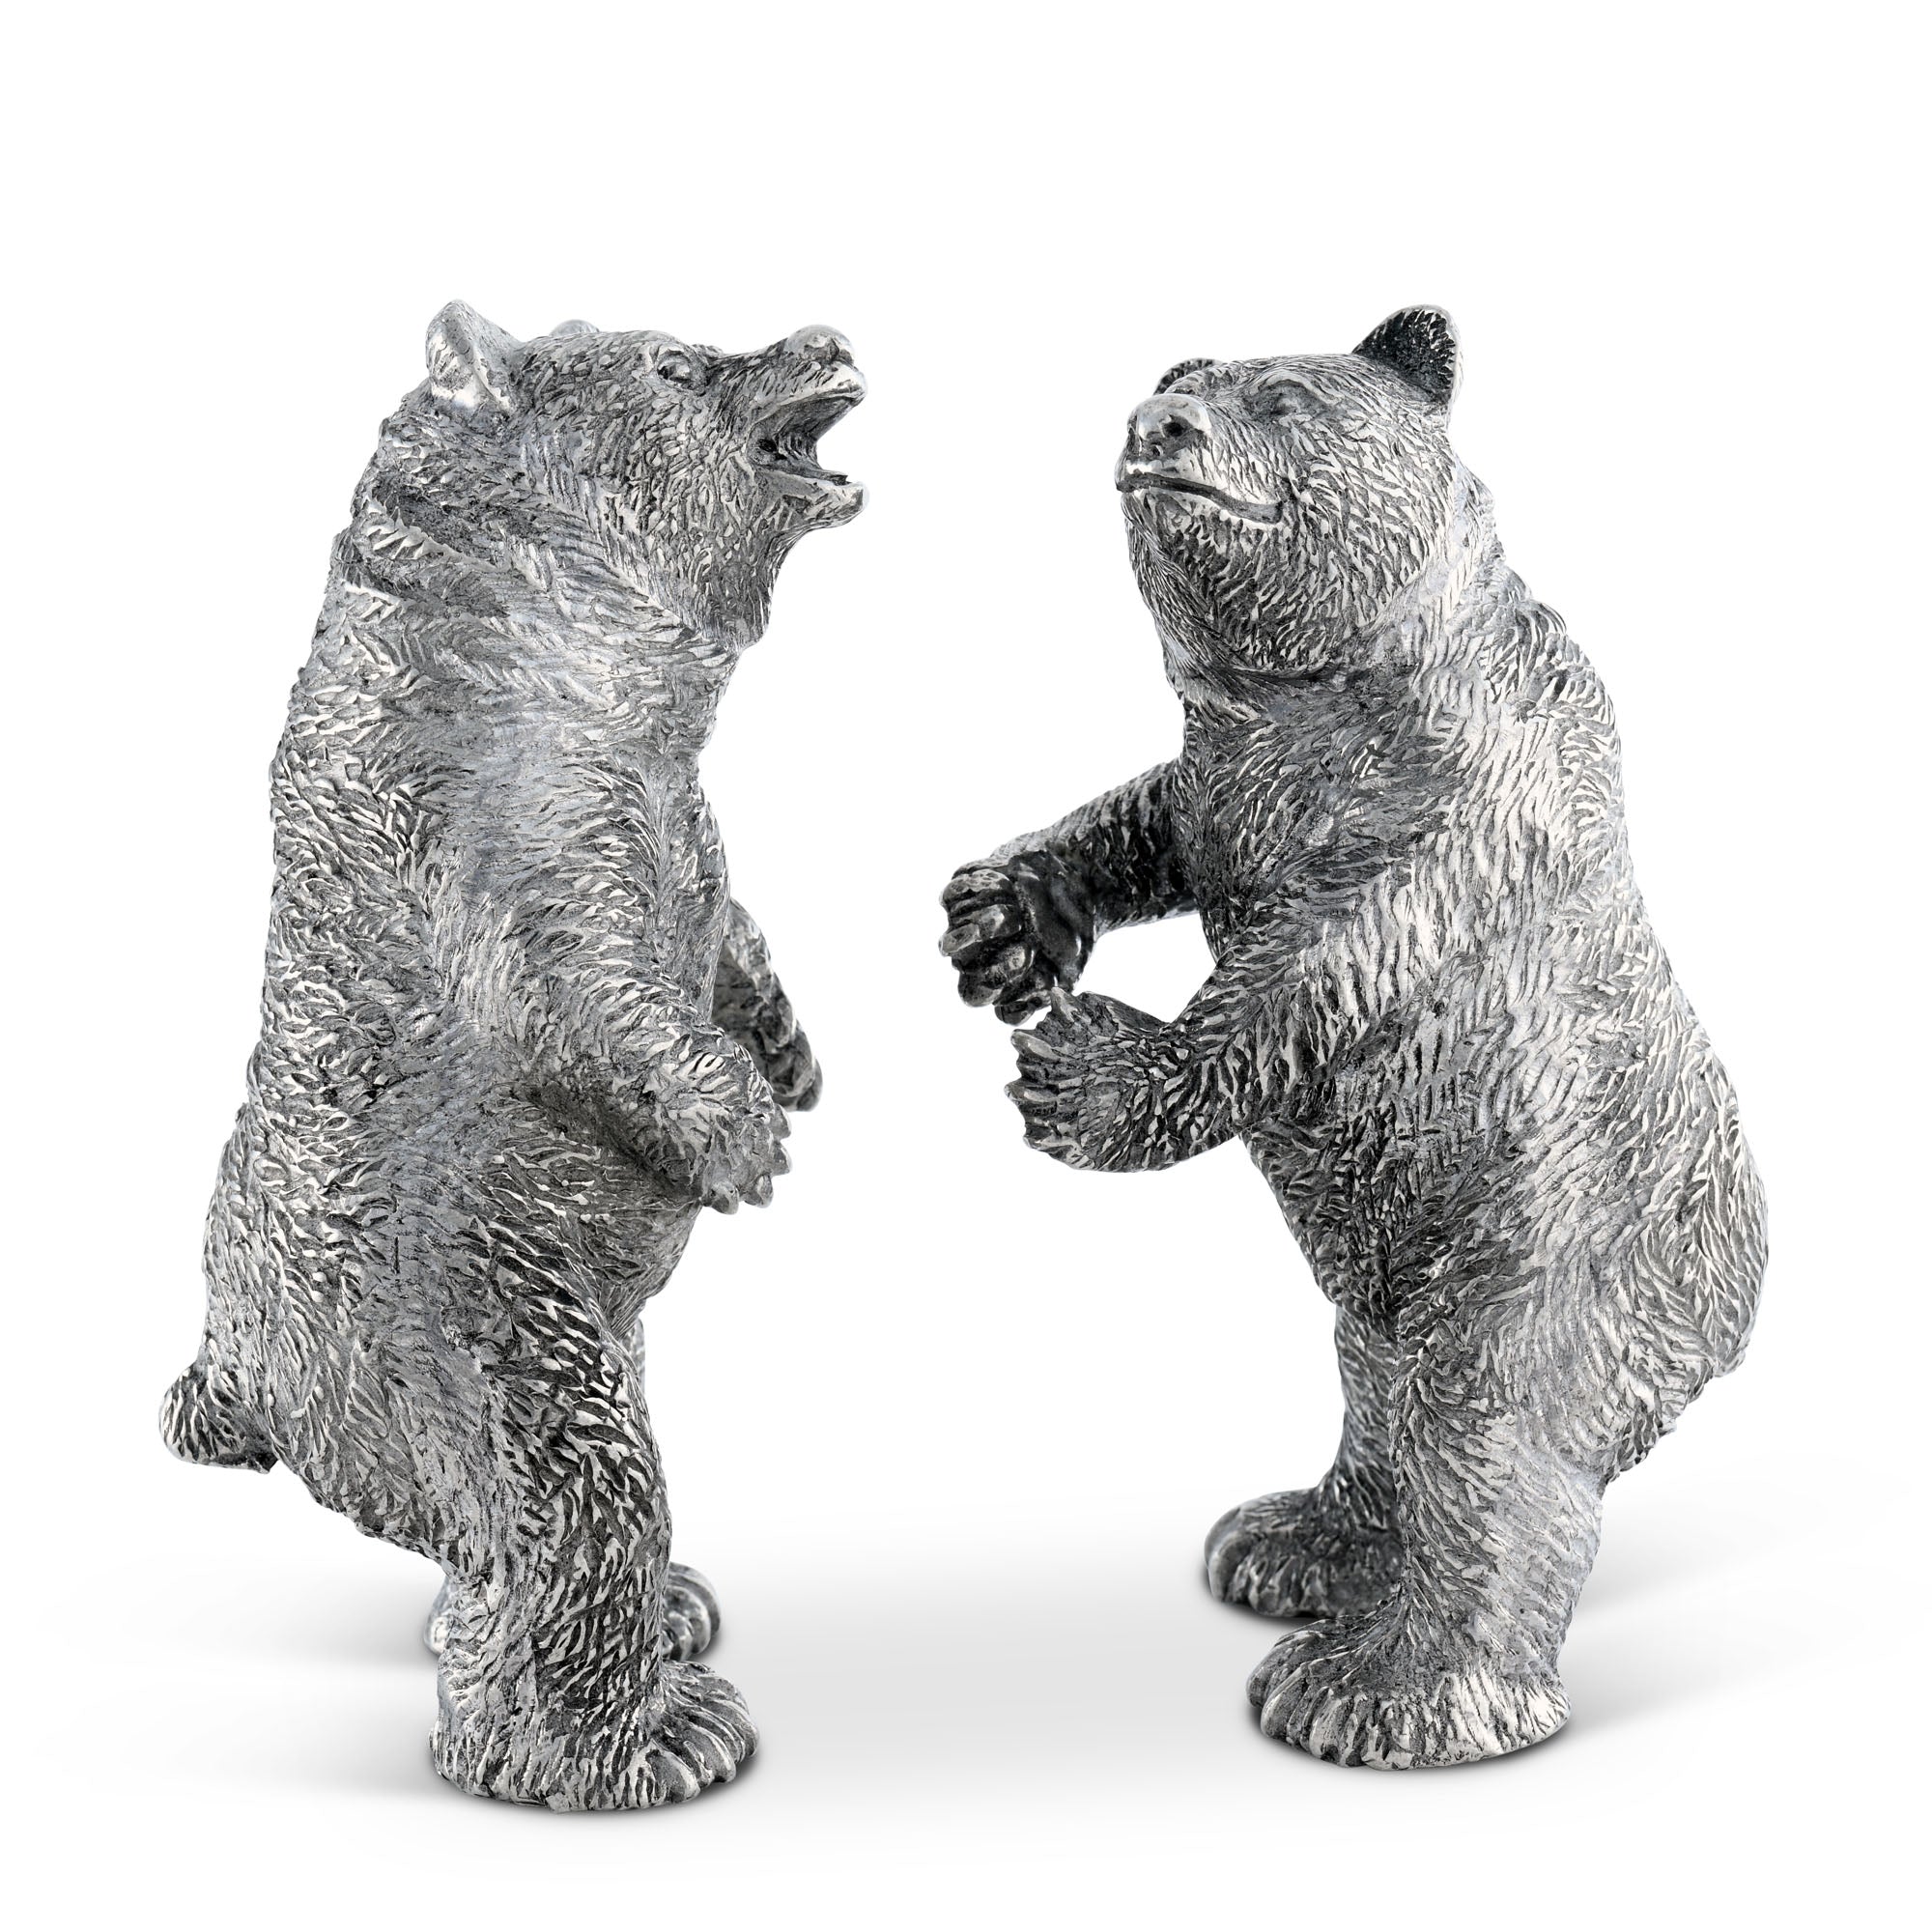 Vagabond House Salt and Pepper - Grizzly Bear Product Image